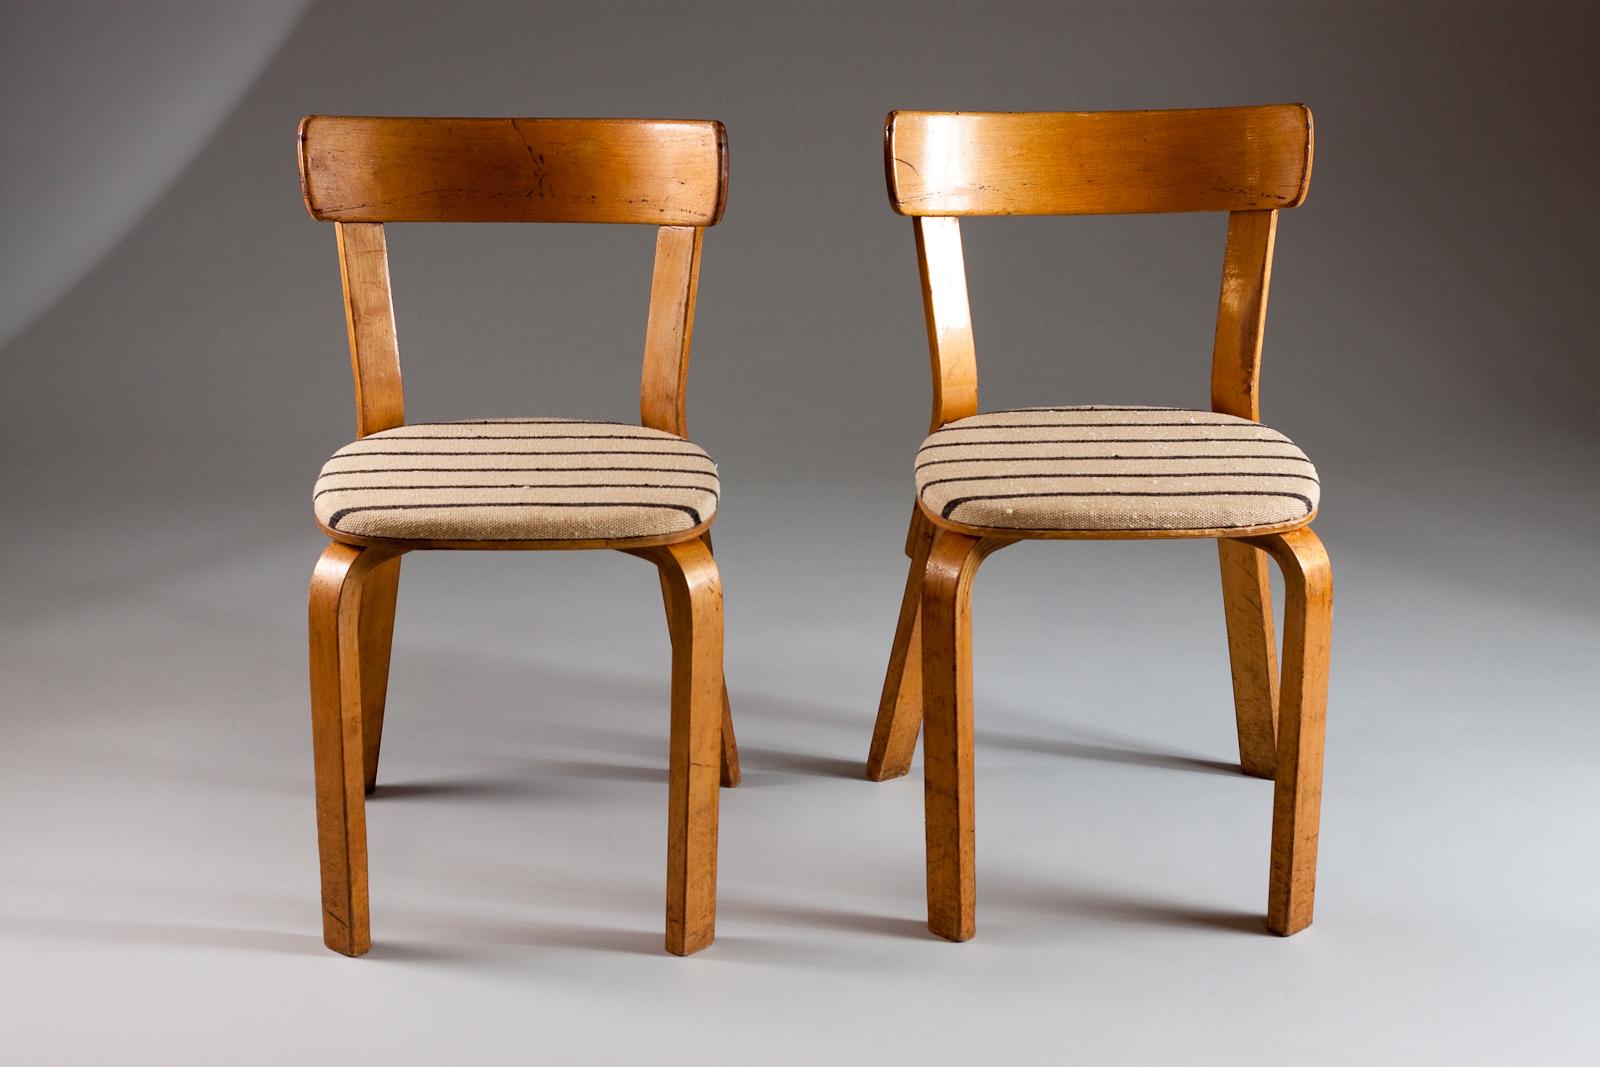 Upholstery Alvar Aalto, Rare Pair of 1930s 69 Chairs with 